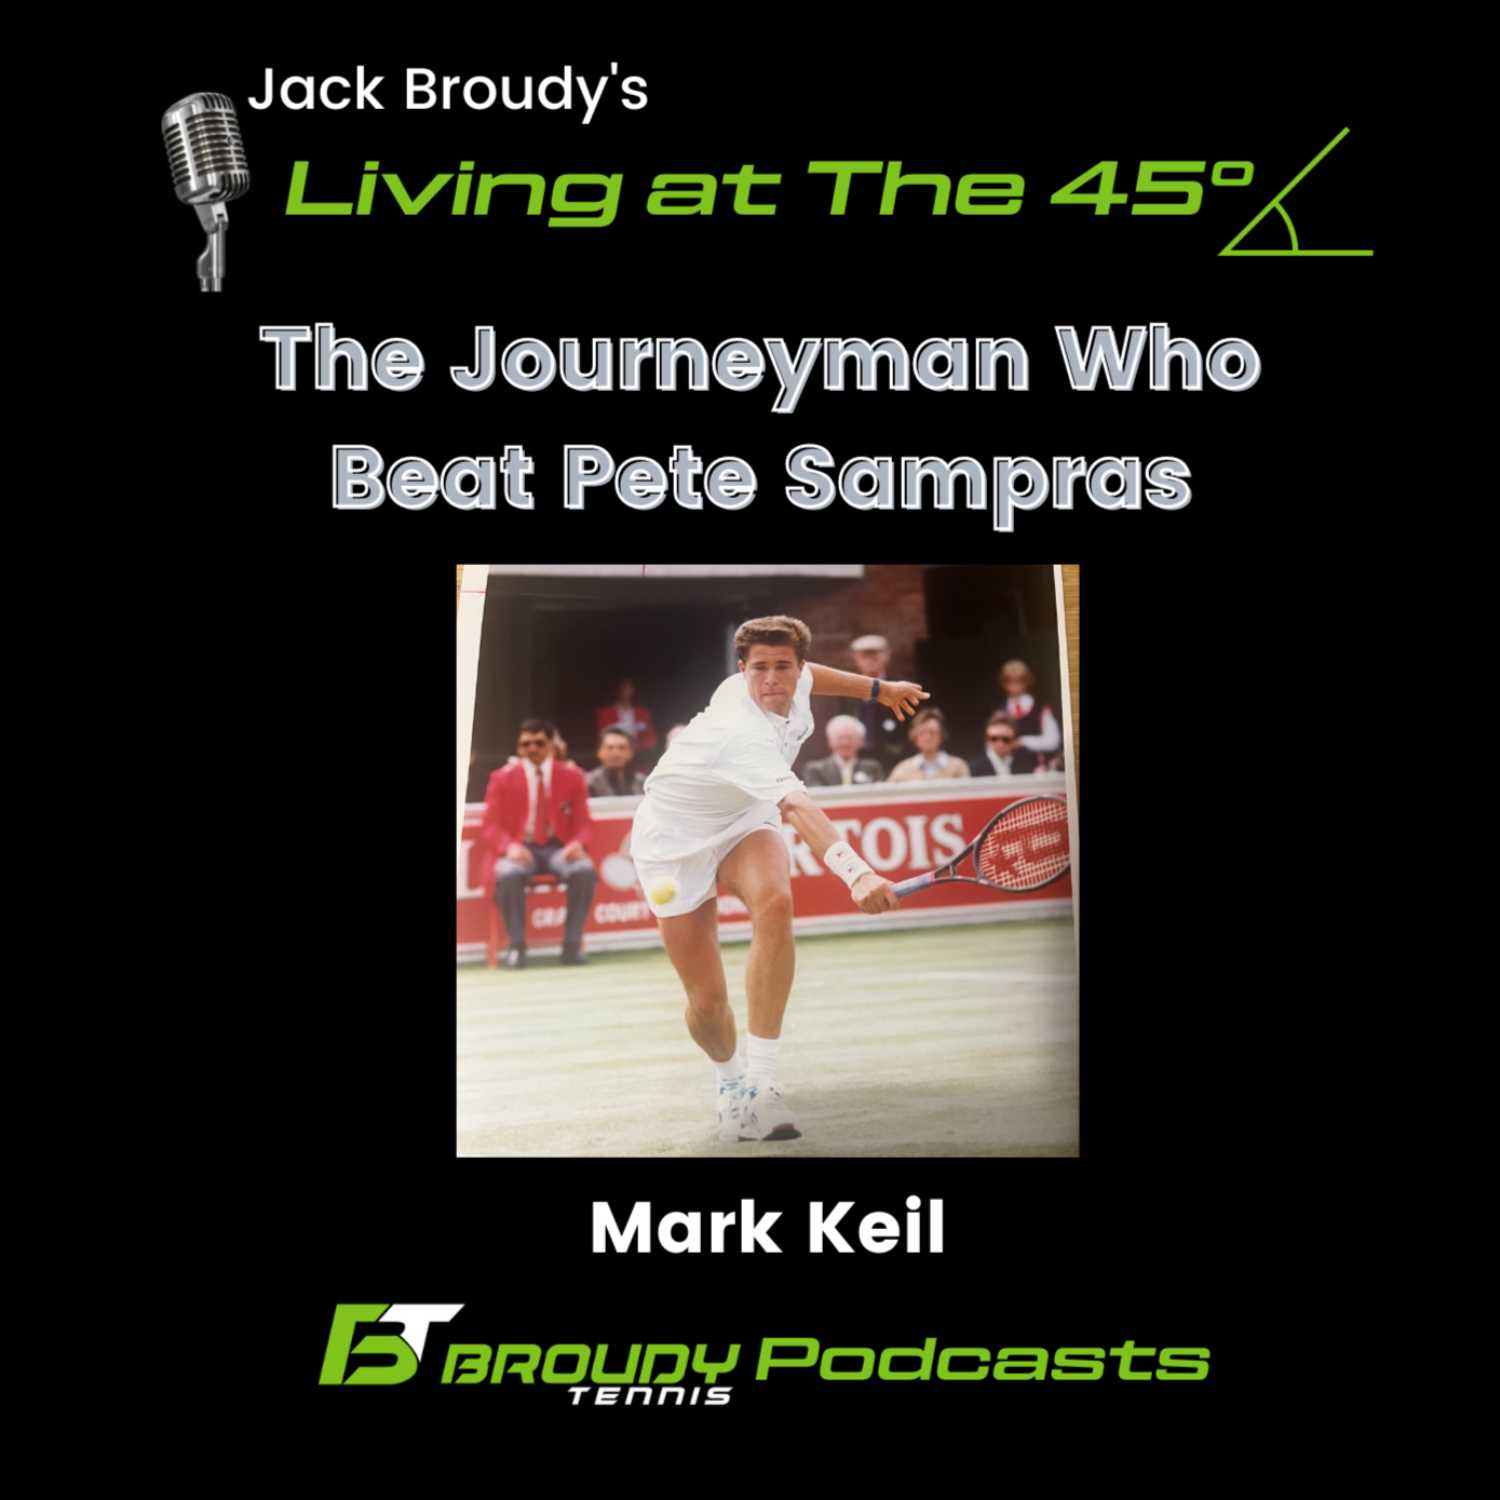 Living at The 45 with Mark Keil: Worst Tennis Player to Beat Pete Sampras